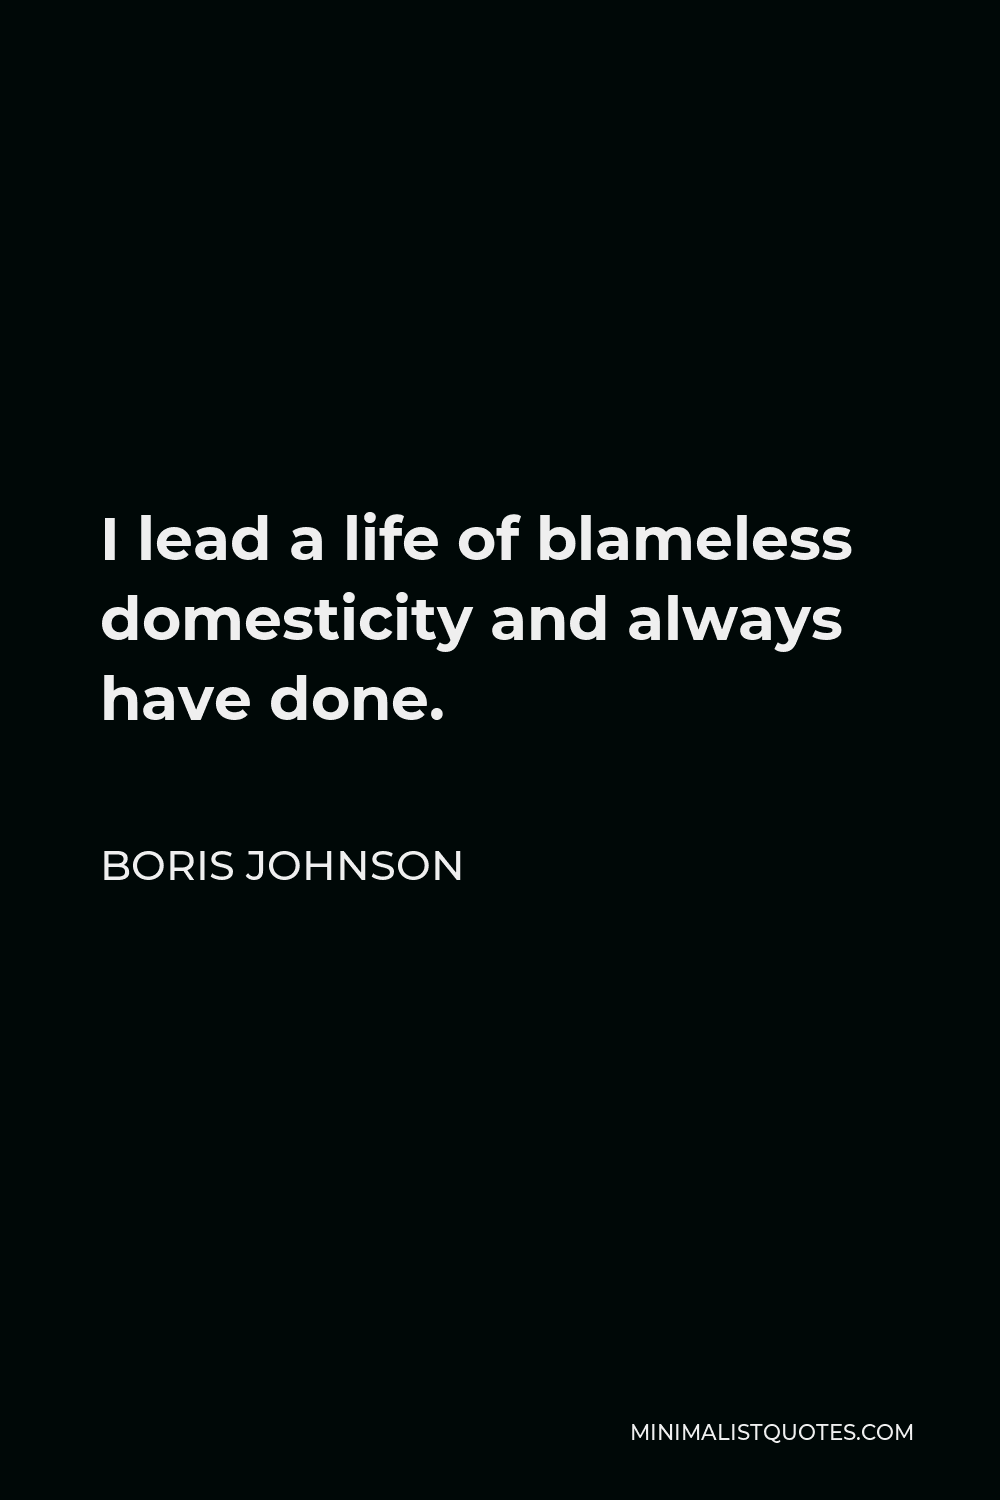 Boris Johnson Quote - I lead a life of blameless domesticity and always have done.